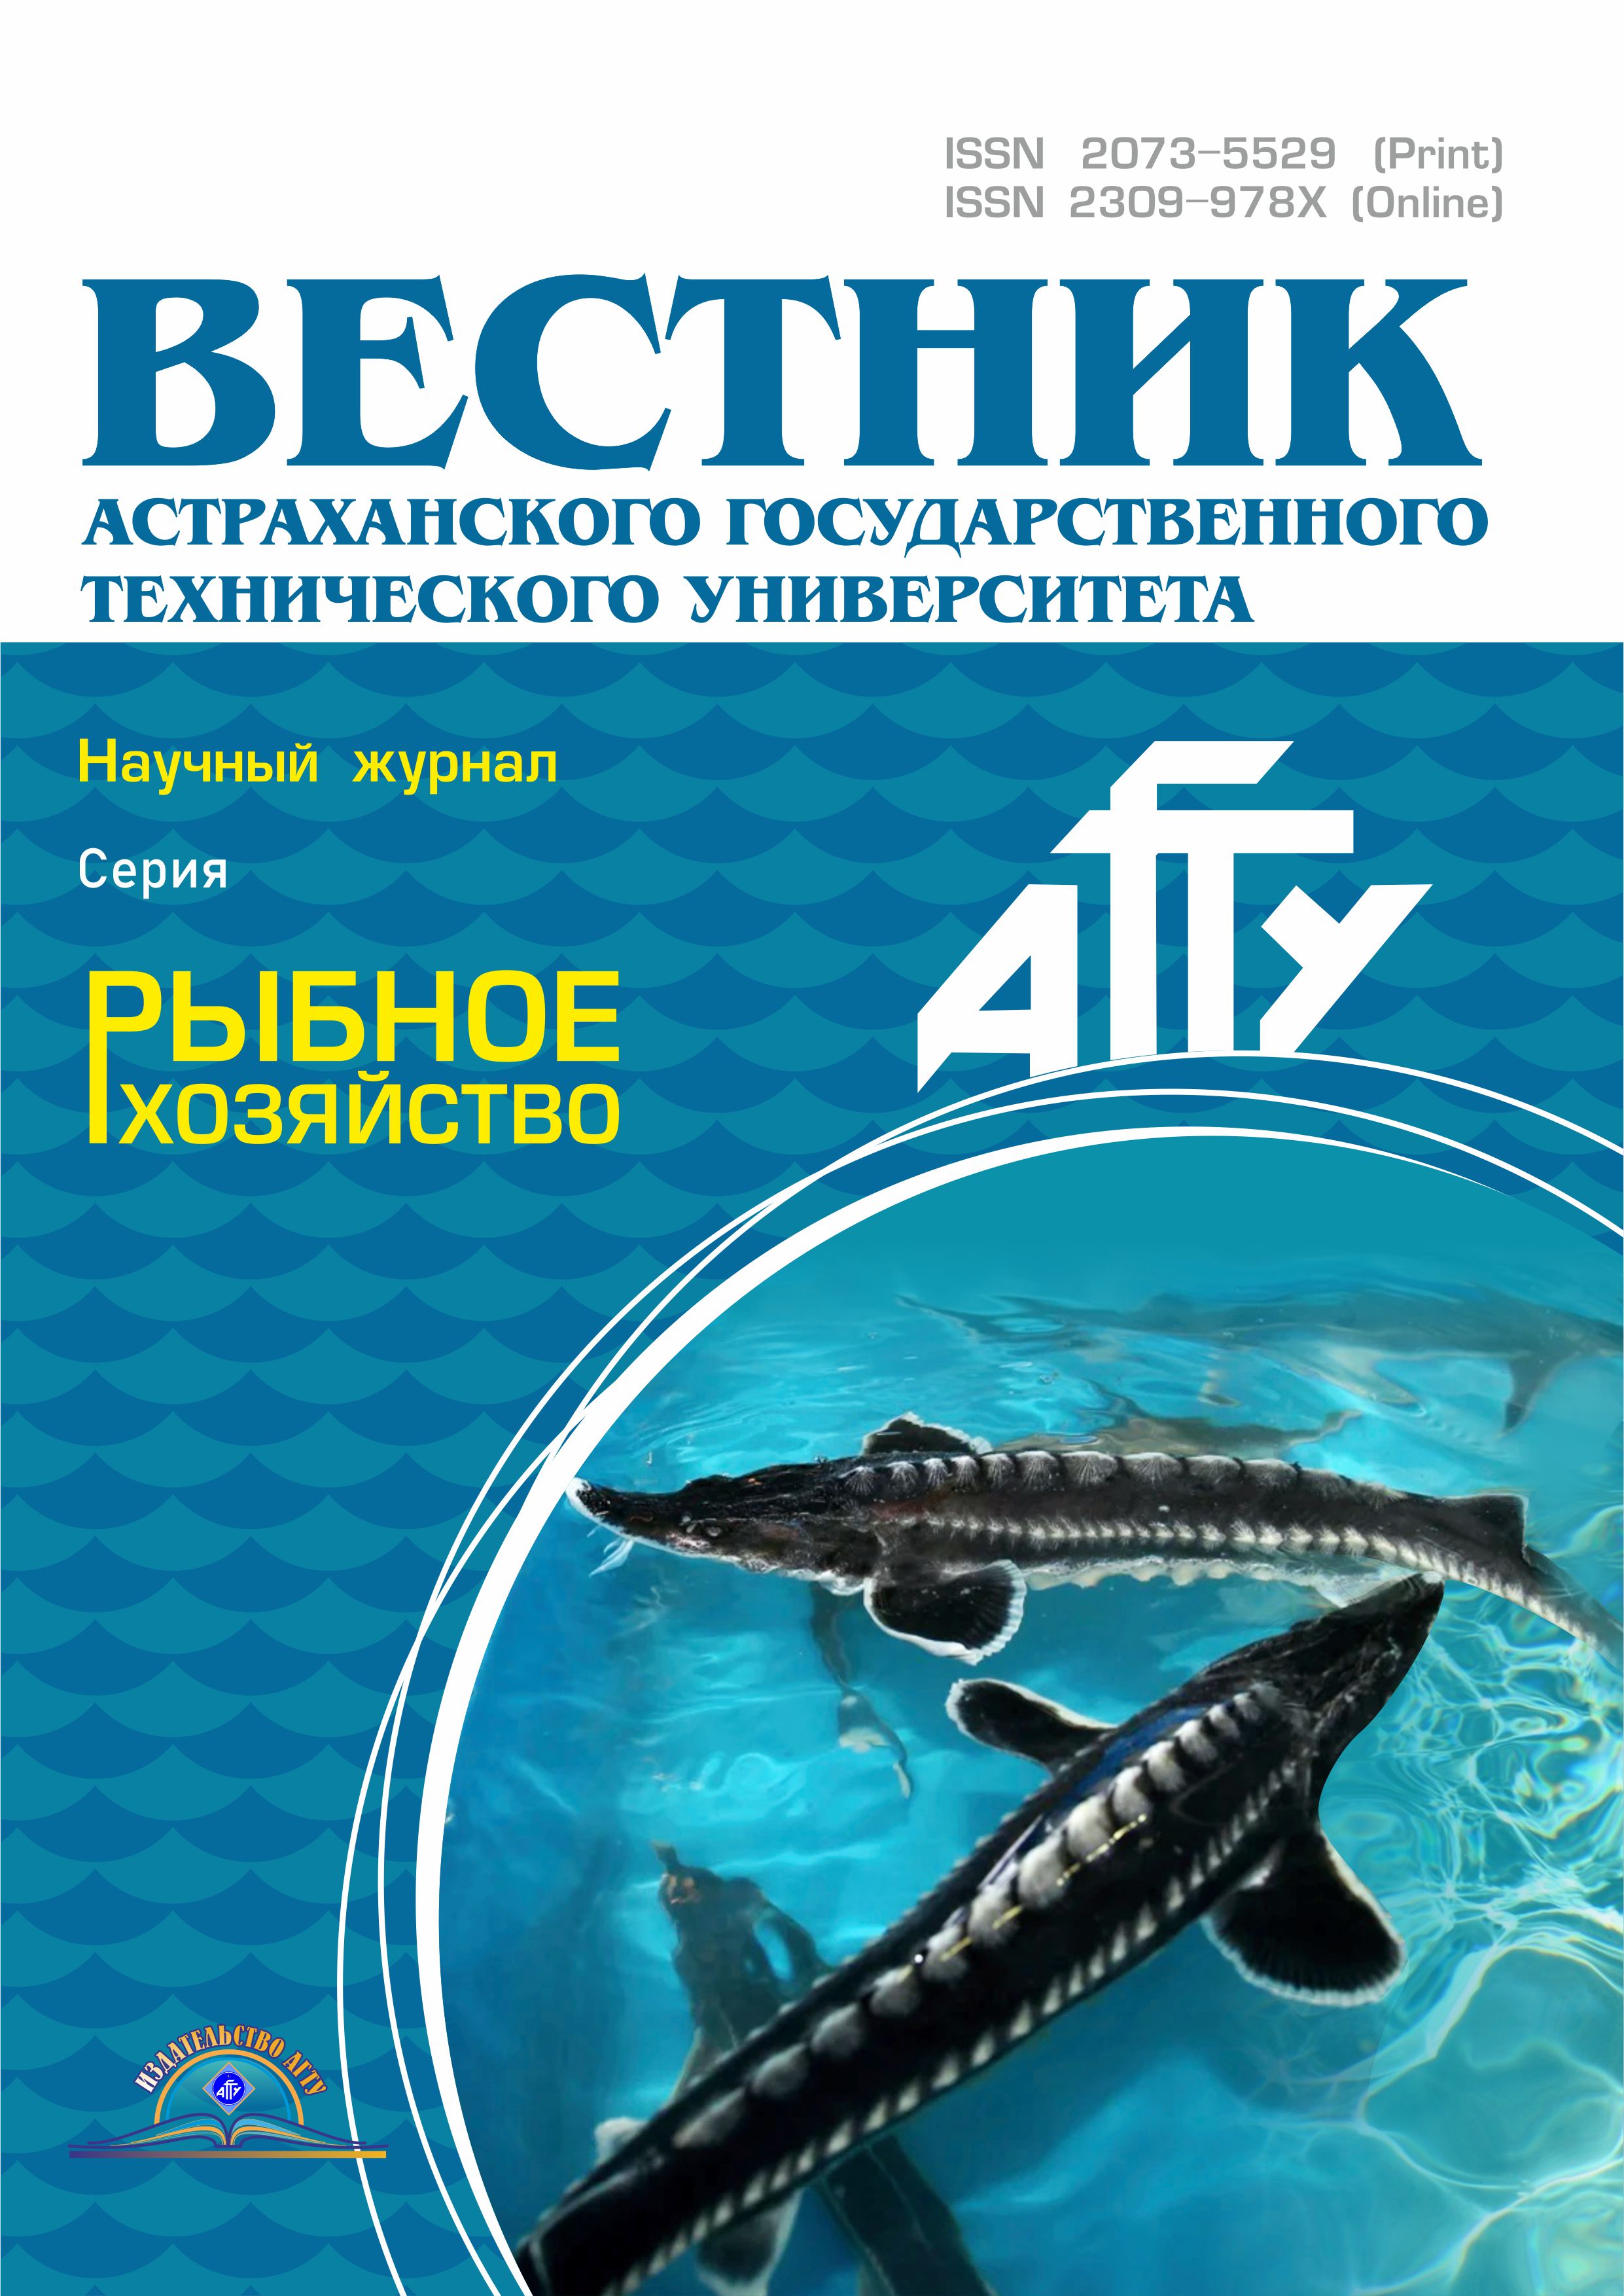                         ALIEN SPECIES OF POLYCHAETES IN THE KUIBYSHEV AND SARATOV RESERVOIRS: DISPERSAL, PECULIARITIES OF NATURALIZATION AND SIZE-WEIGHT CHARACTERISTICS
            